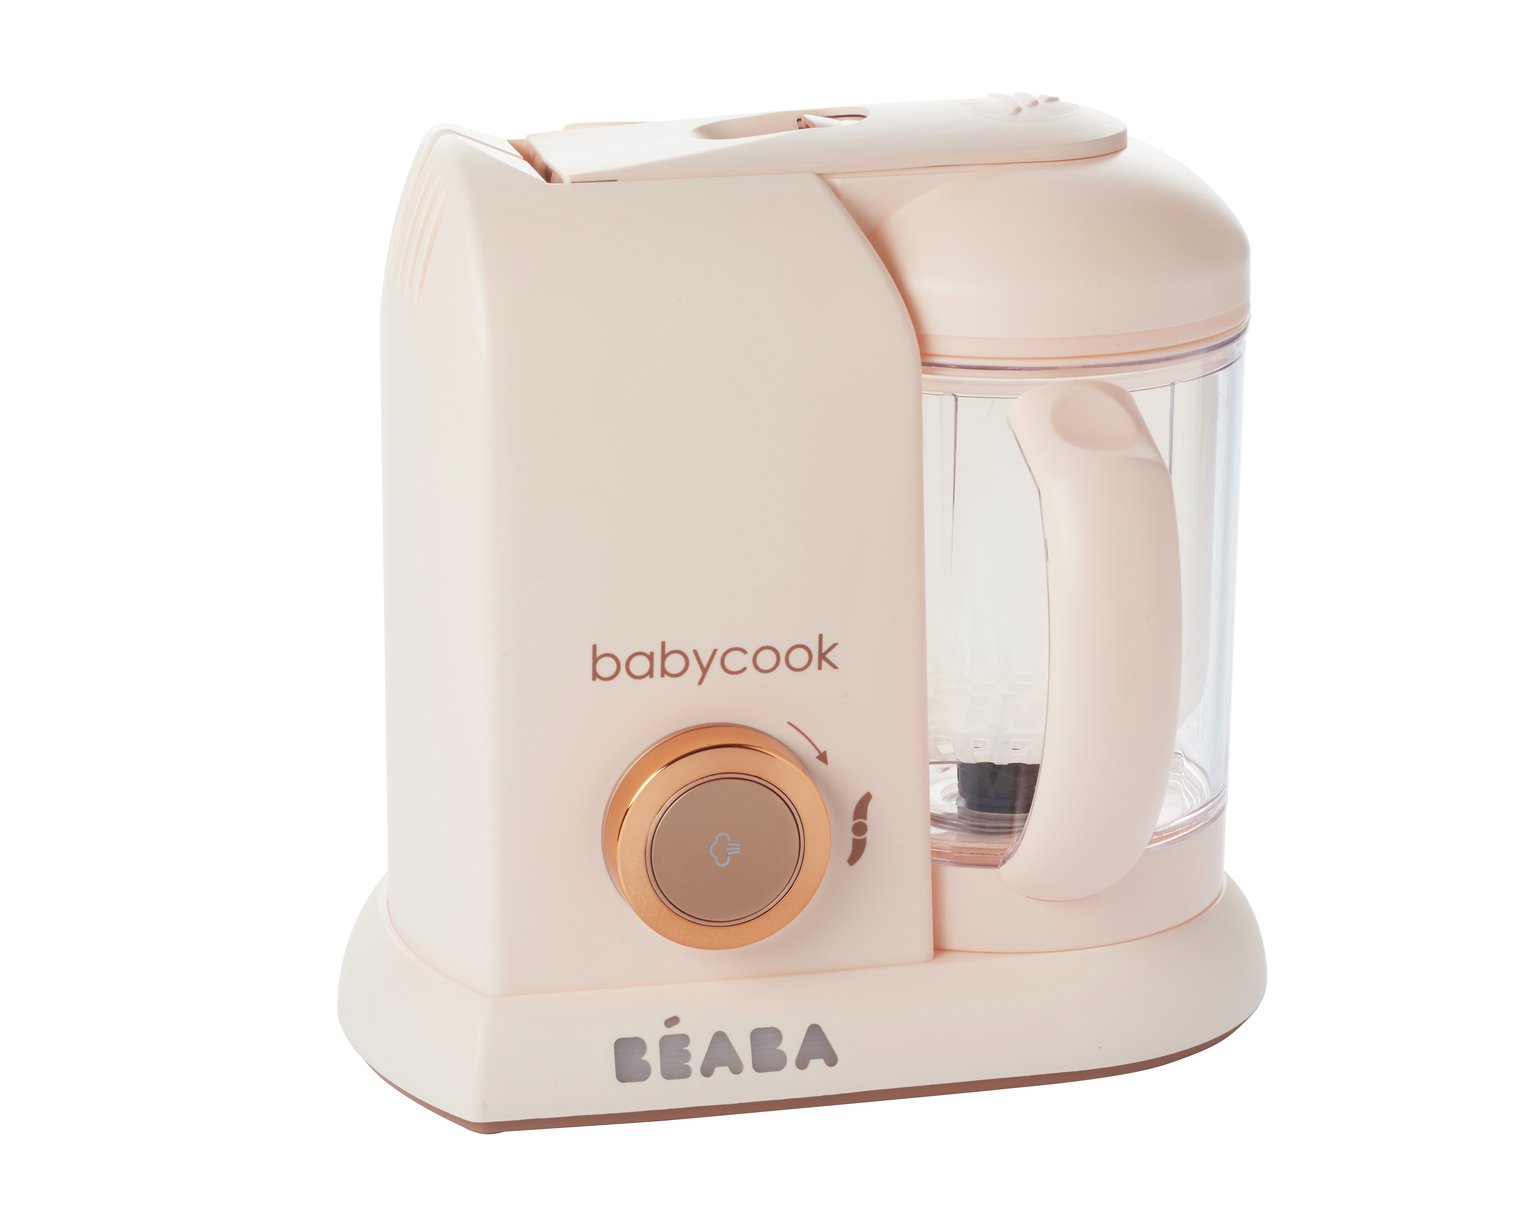 Beaba Babycook Solo Rose Gold Limited Edition Food Maker